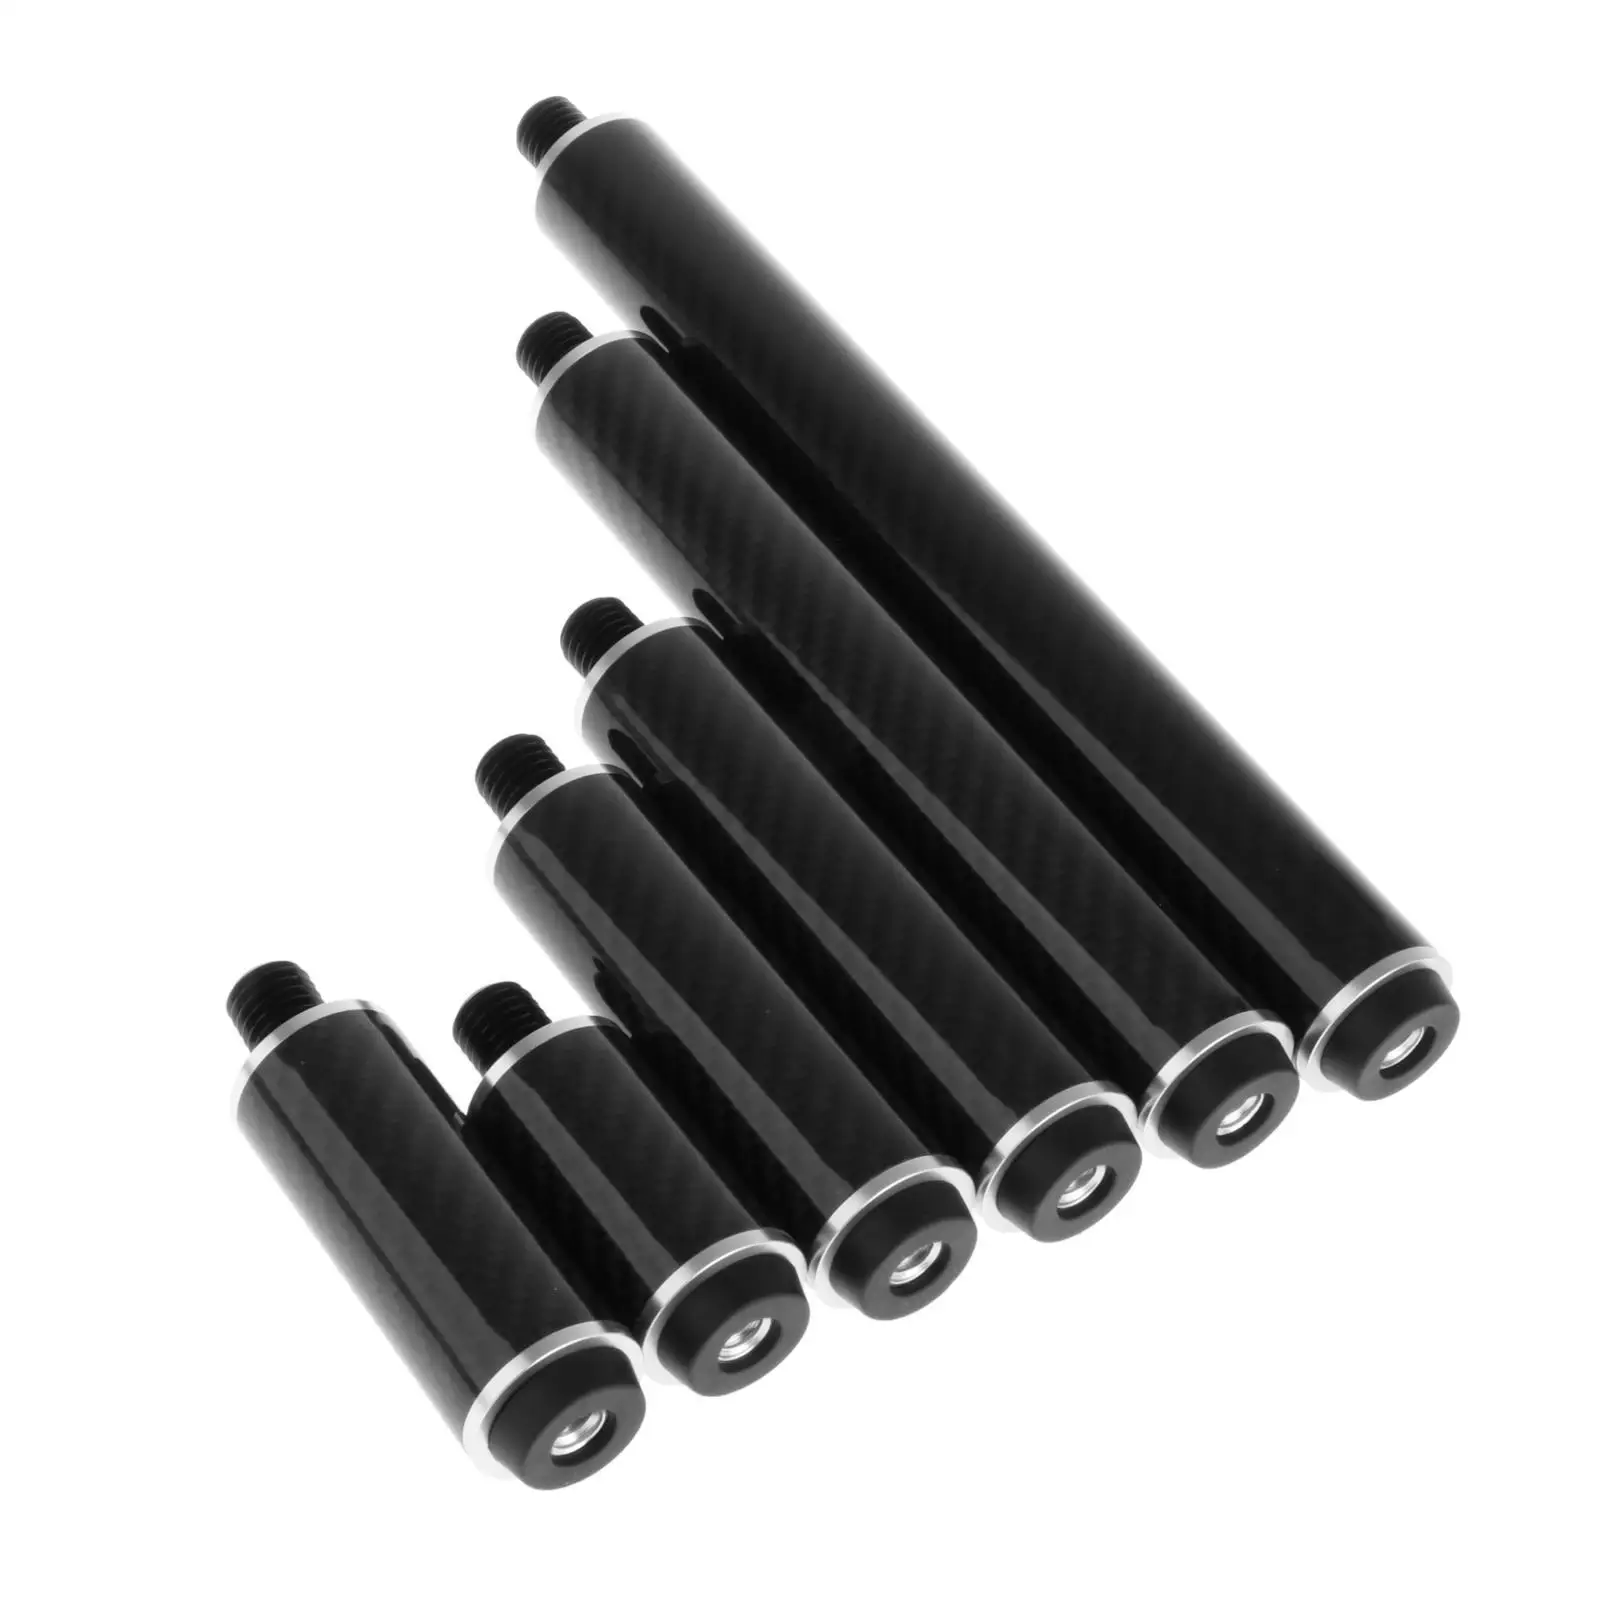 Snooker Cue Stick Cue Extended Lightweight Billiards Pool Cue Extension Cue End Extender for Athlete Entertainment Practice